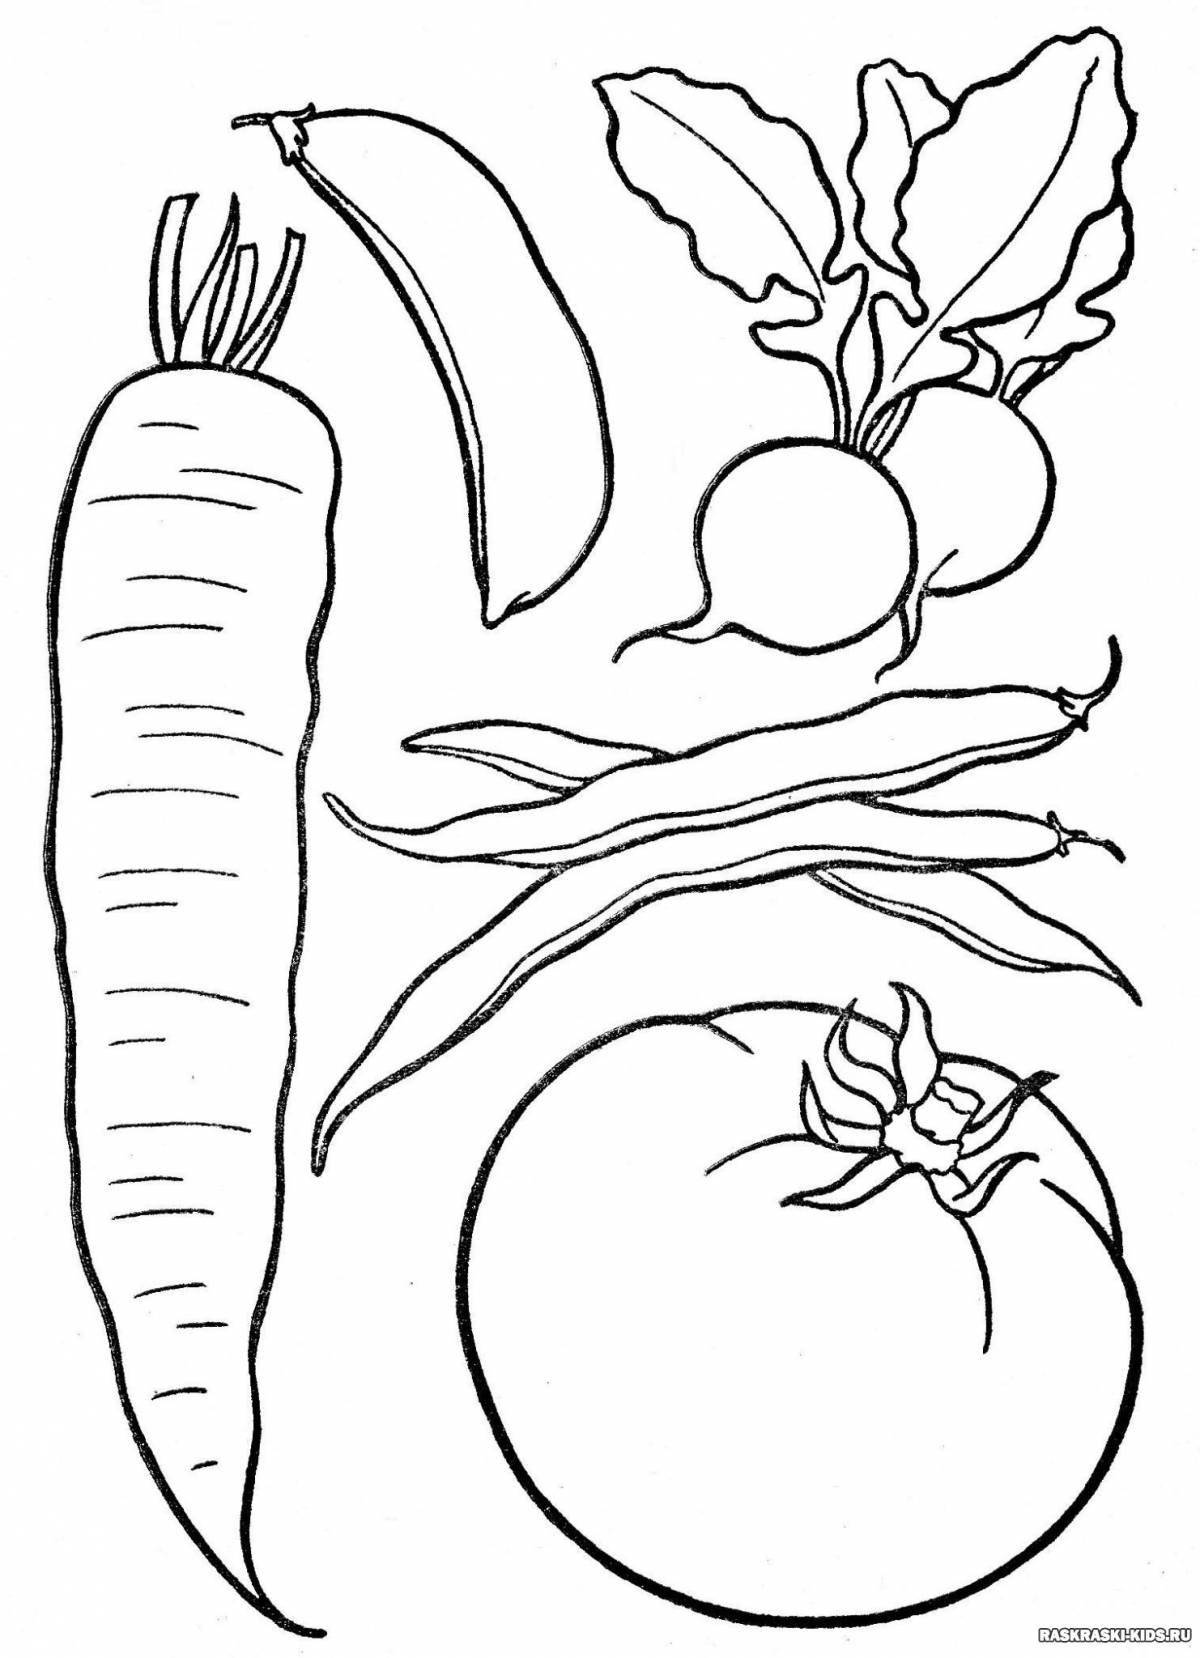 Adorable vegetable coloring book for 3 year olds